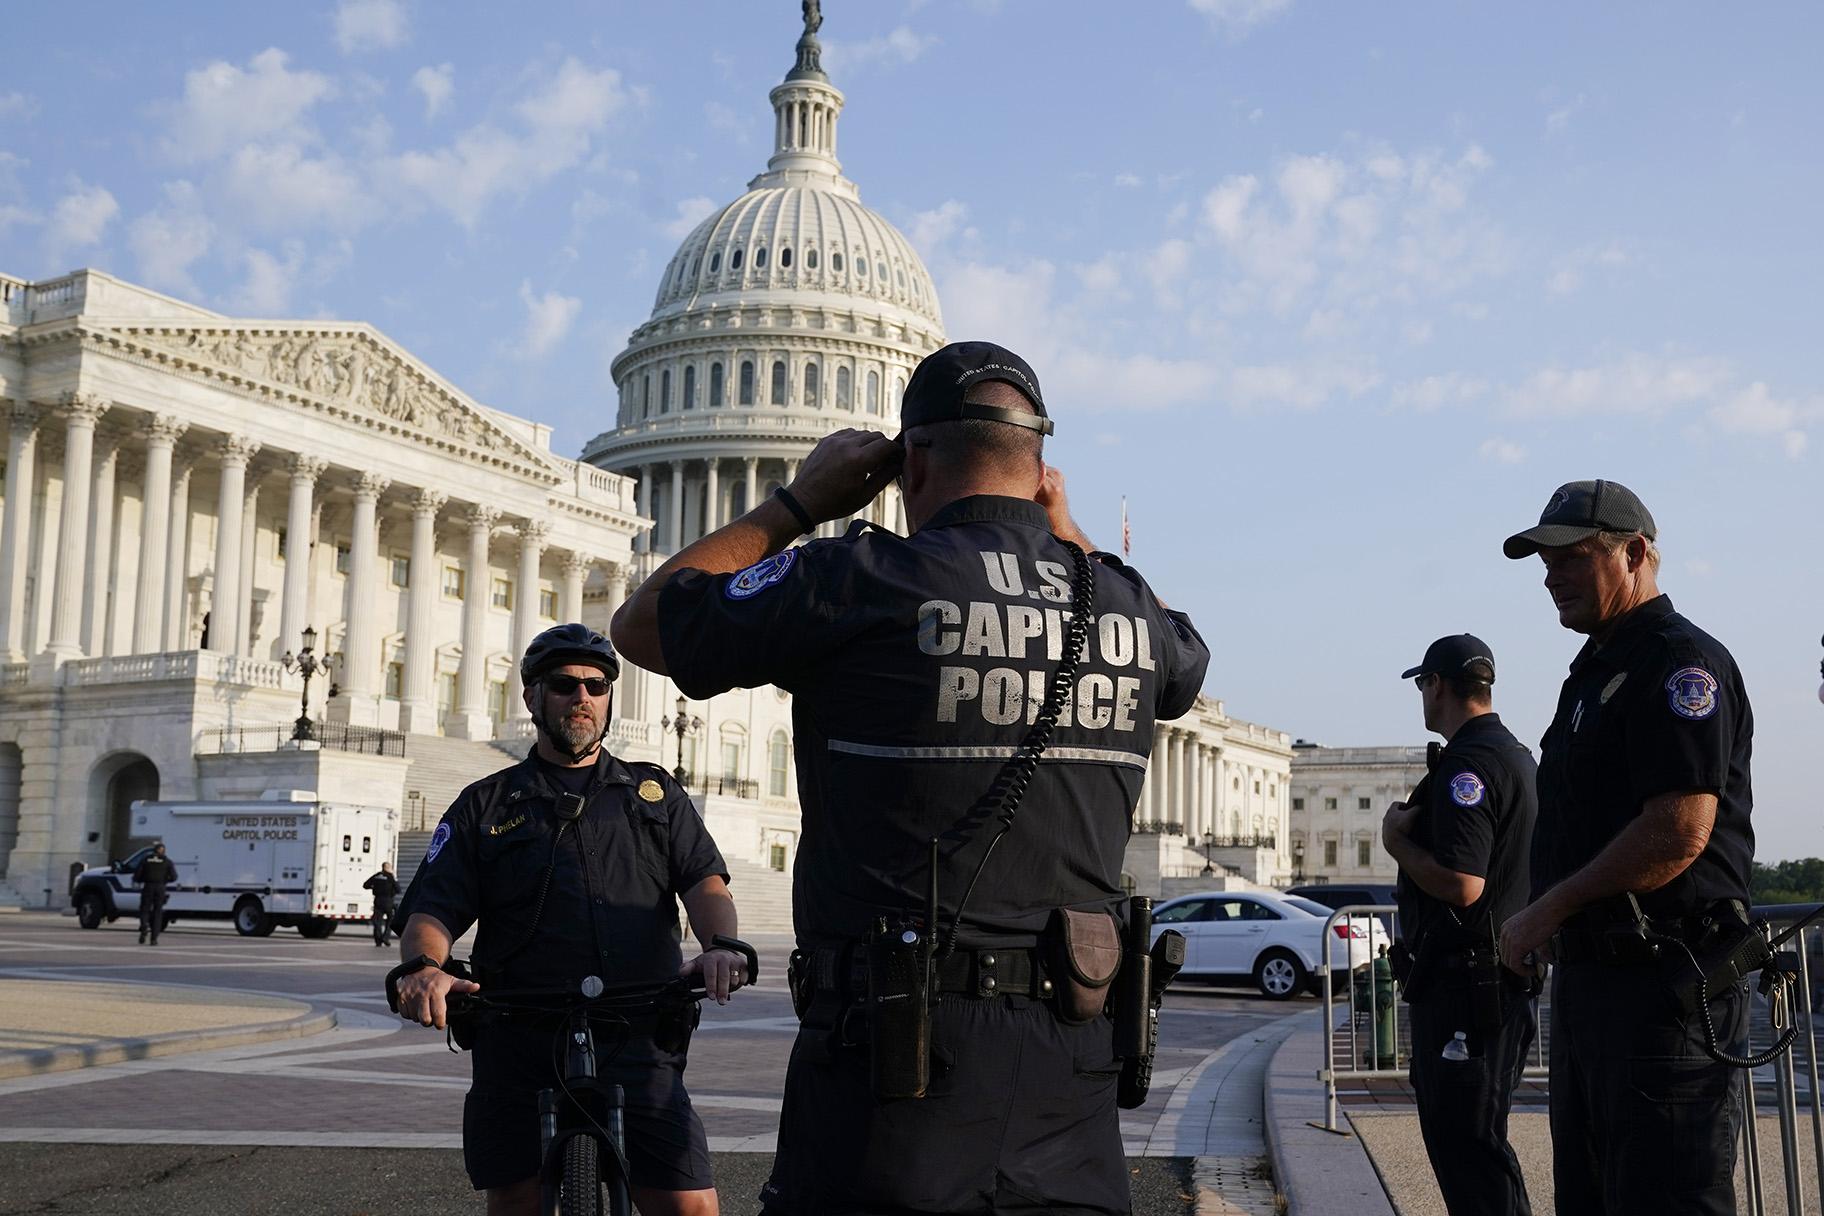 The U.S. Capitol is seen in Washington, early Tuesday, July 27, 2021, as U.S. Capitol Police watch the perimeter. (AP Photo / J. Scott Applewhite)